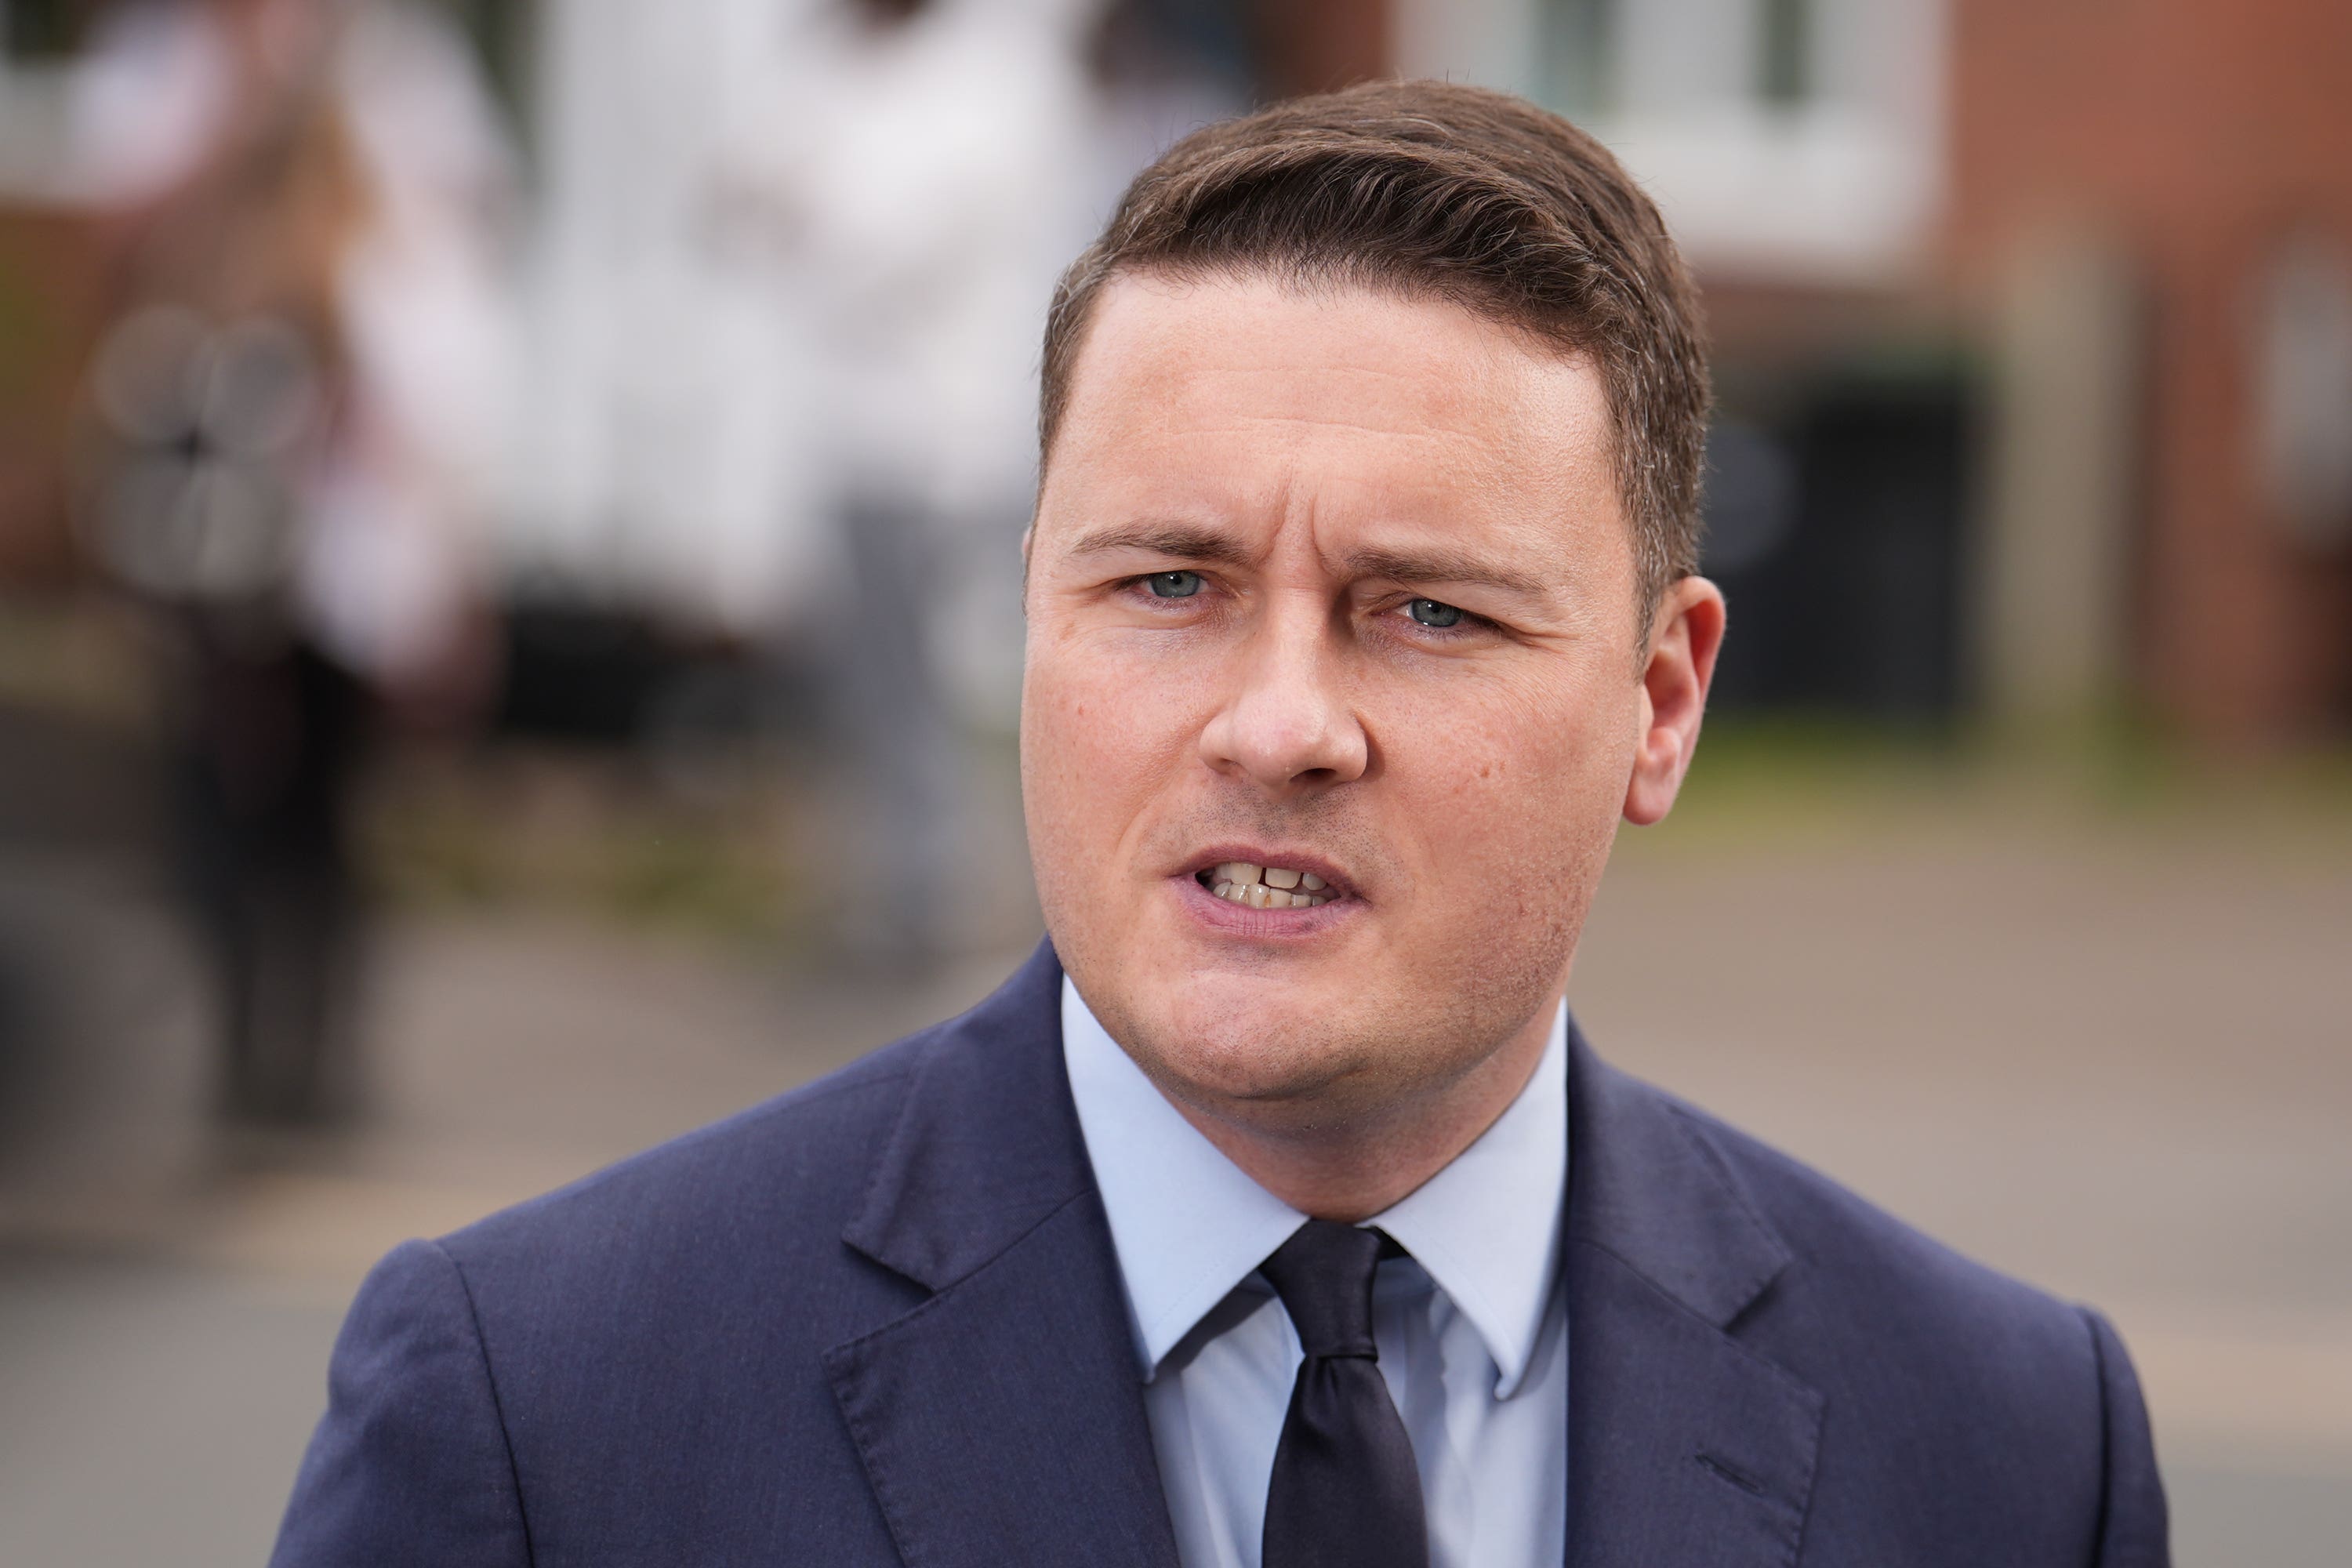 Wes Streeting insists Labour is a party which celebrates success and encourages ambition and aspiration